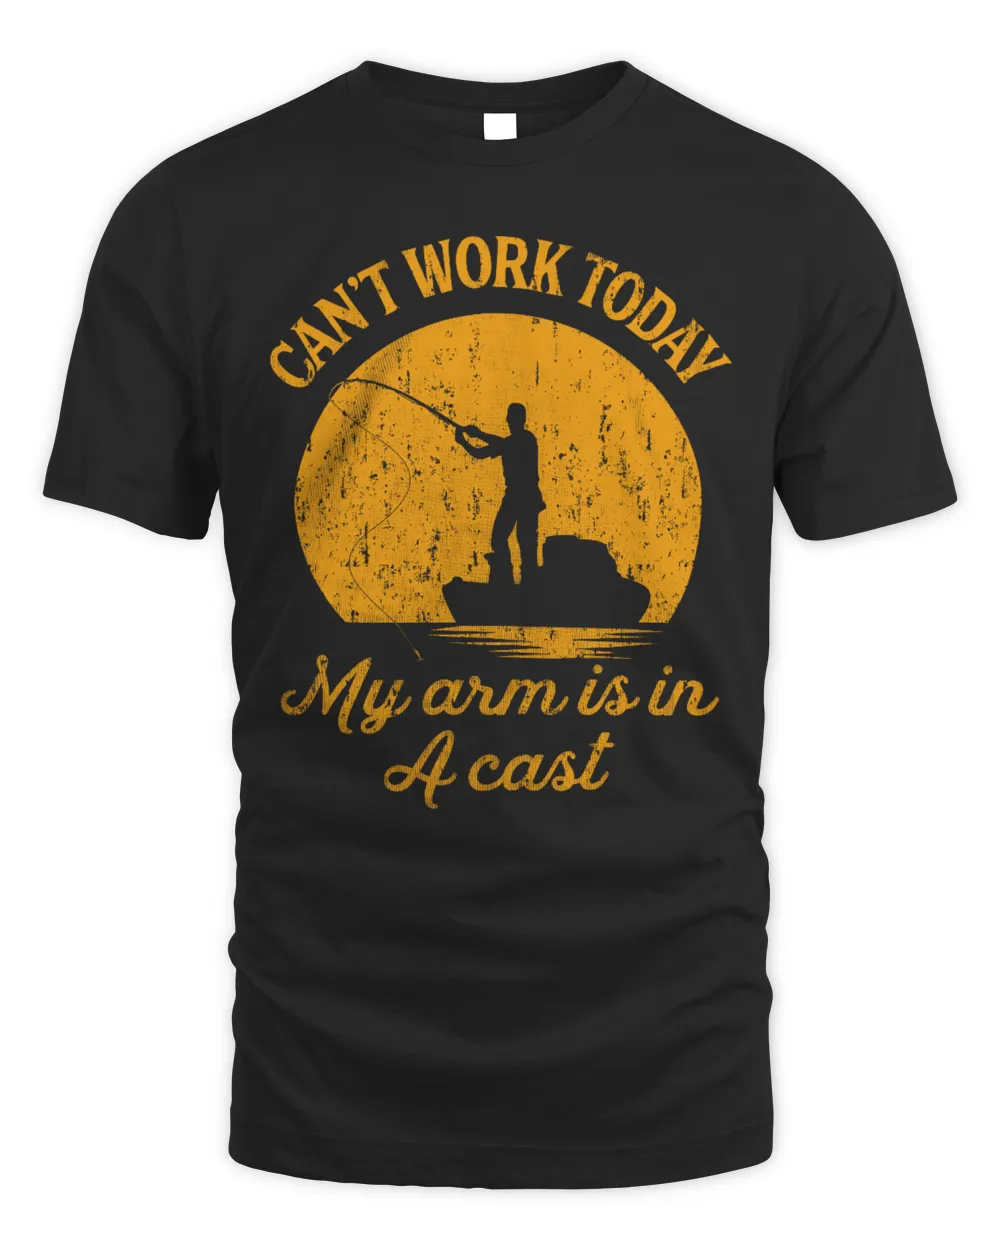 Mens Can't Work Today My Arm Is In A Cast T-Shirt Funny Fishing Tee